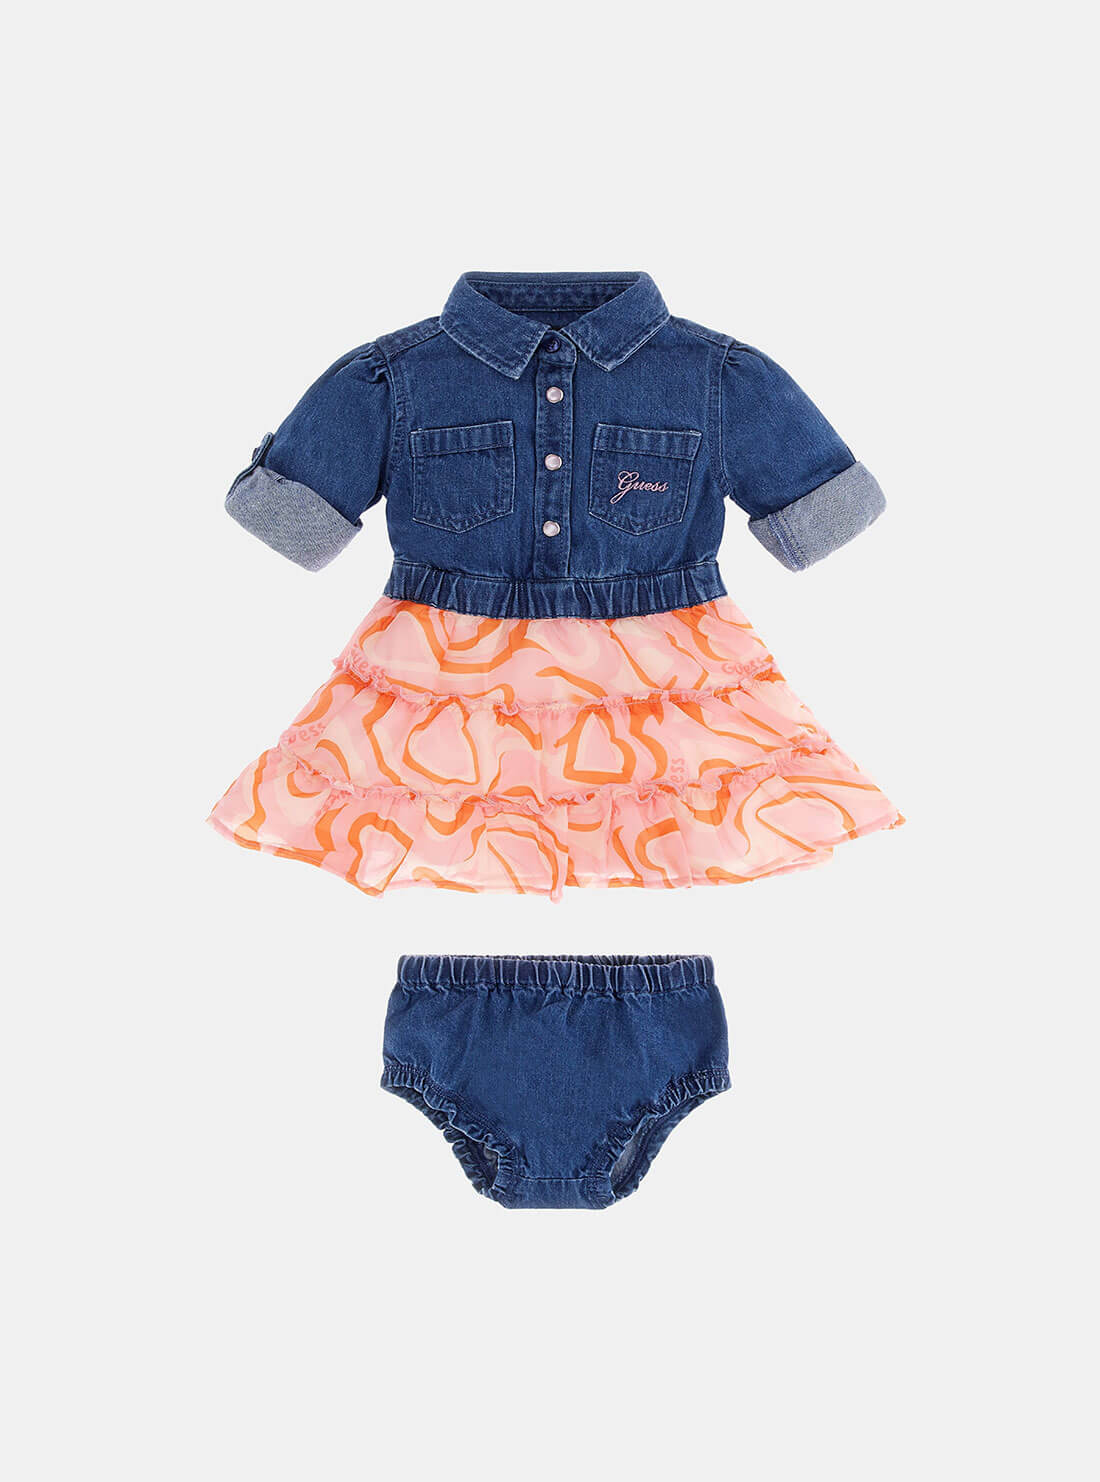 Blue Denim and Heart Print Dress with Panties Set (3-18M) | GUESS Kids | front view